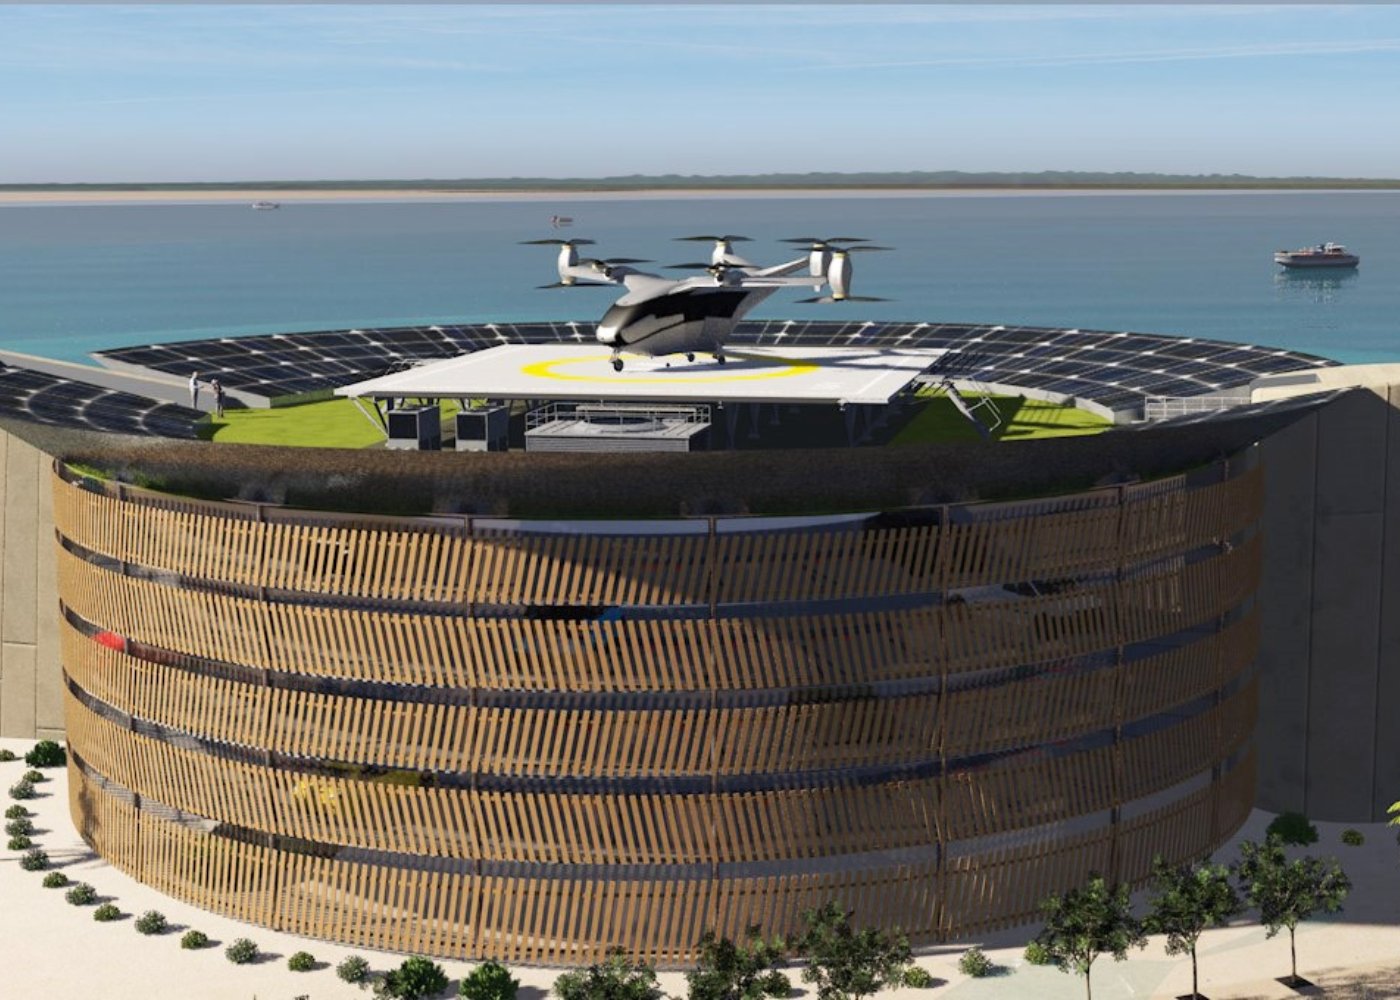 Airnova’s vertiport network aims to link main cities in France